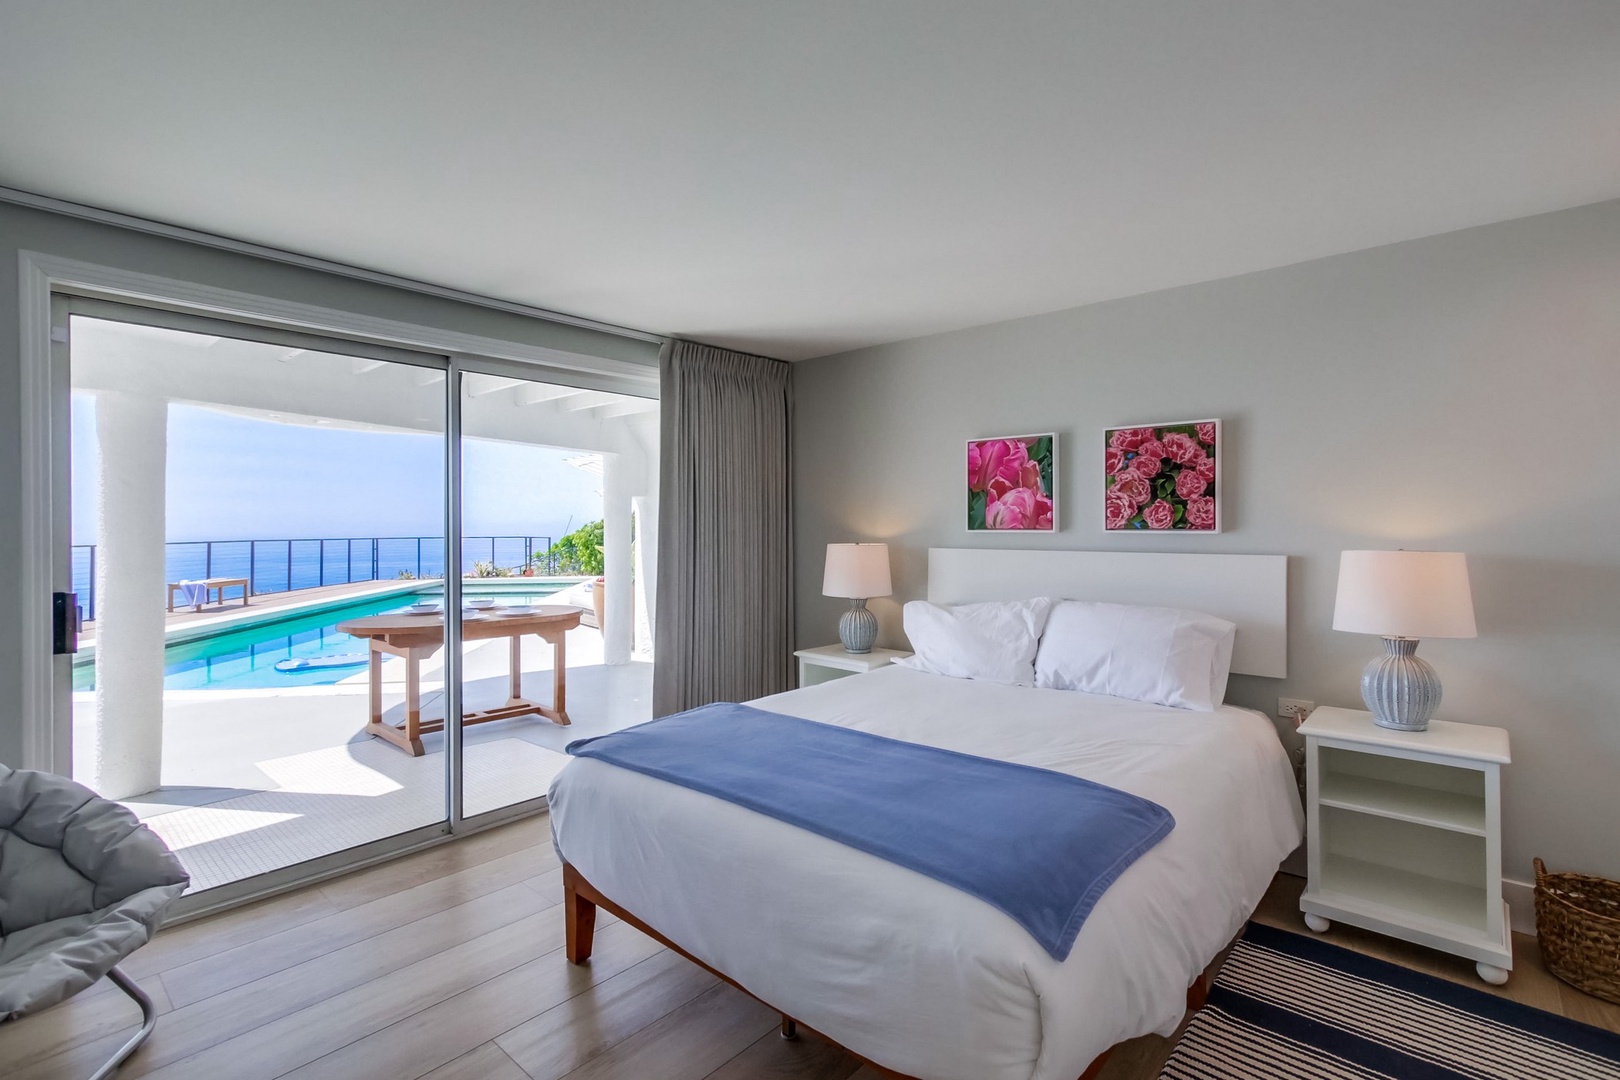 Bedroom 6 with pool and ocean views